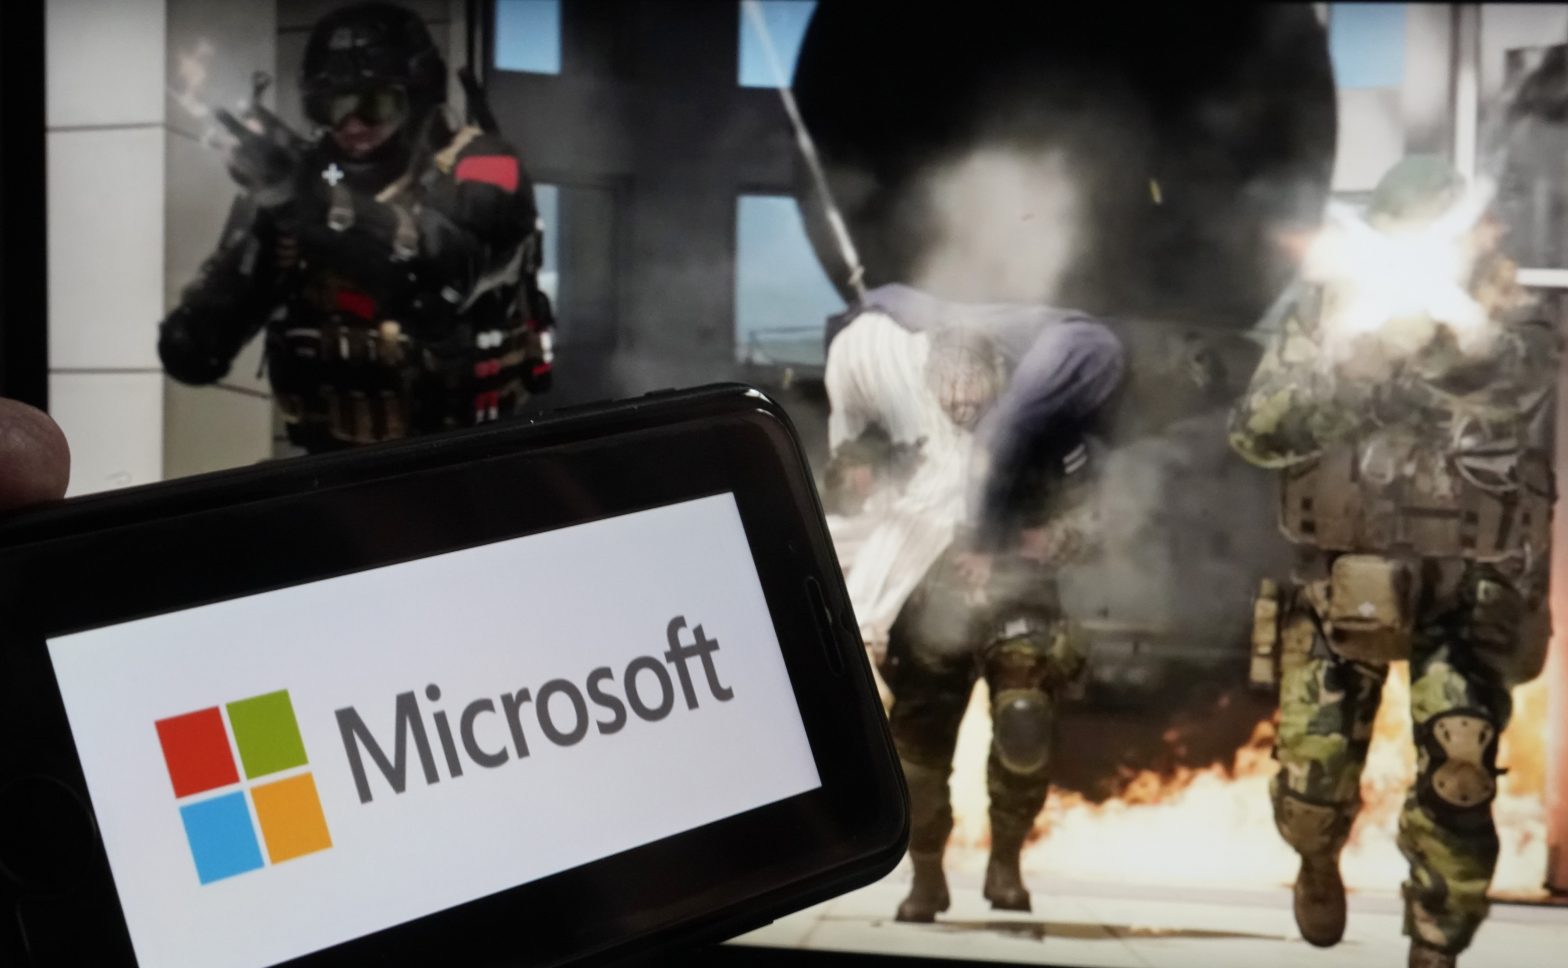 Why the Microsoft Activision Merger Will Succeed Despite the FTC